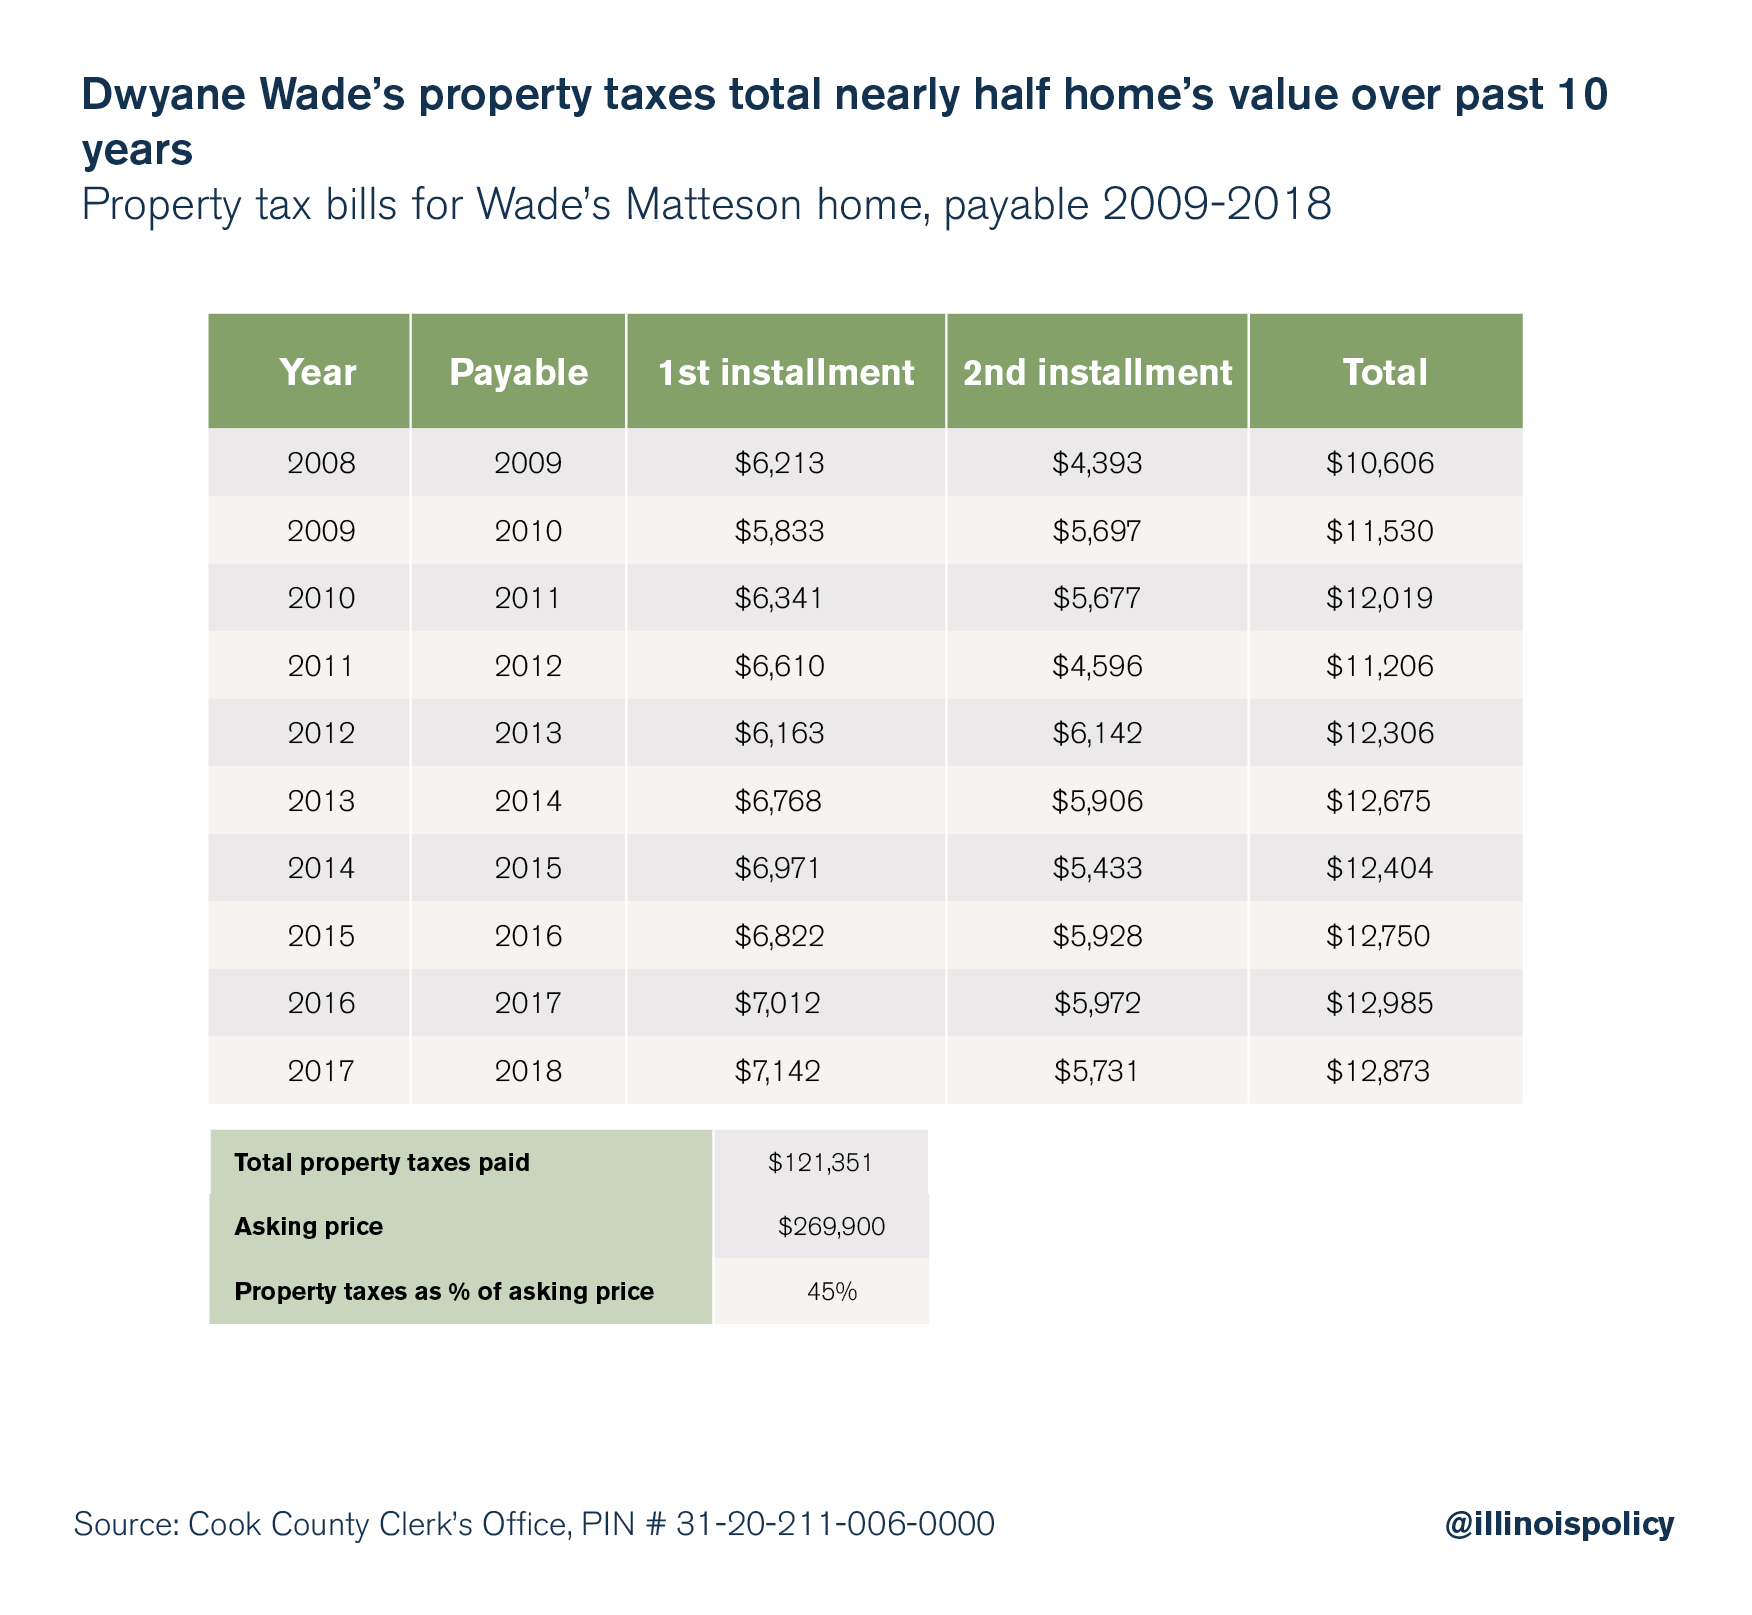 Dwayne Wade's property taxes total nearly half home's value over past 10 years